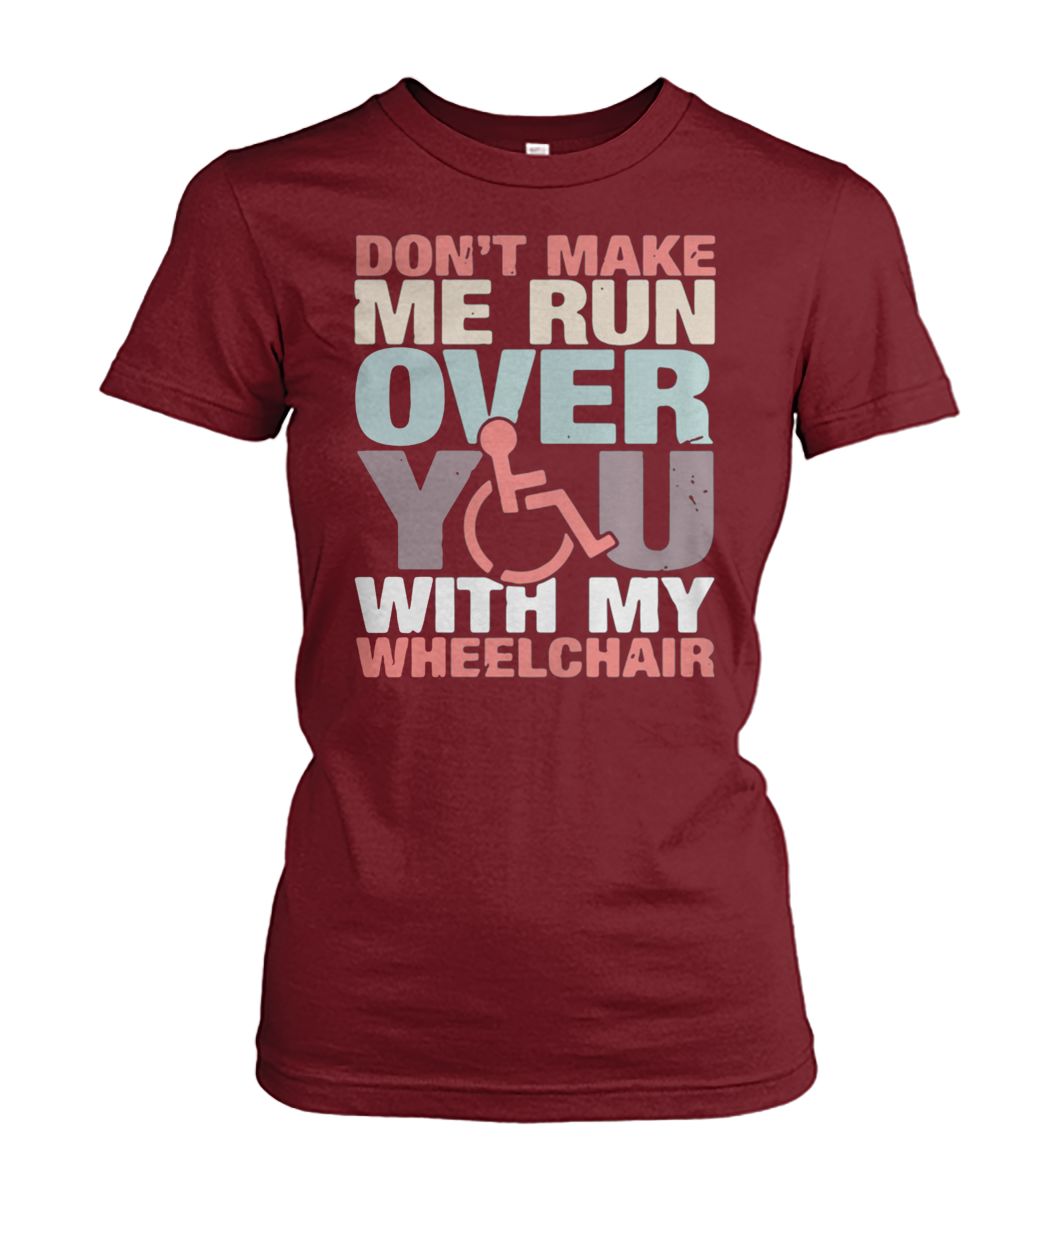 Don't make me run over you with my wheelchair women's crew tee